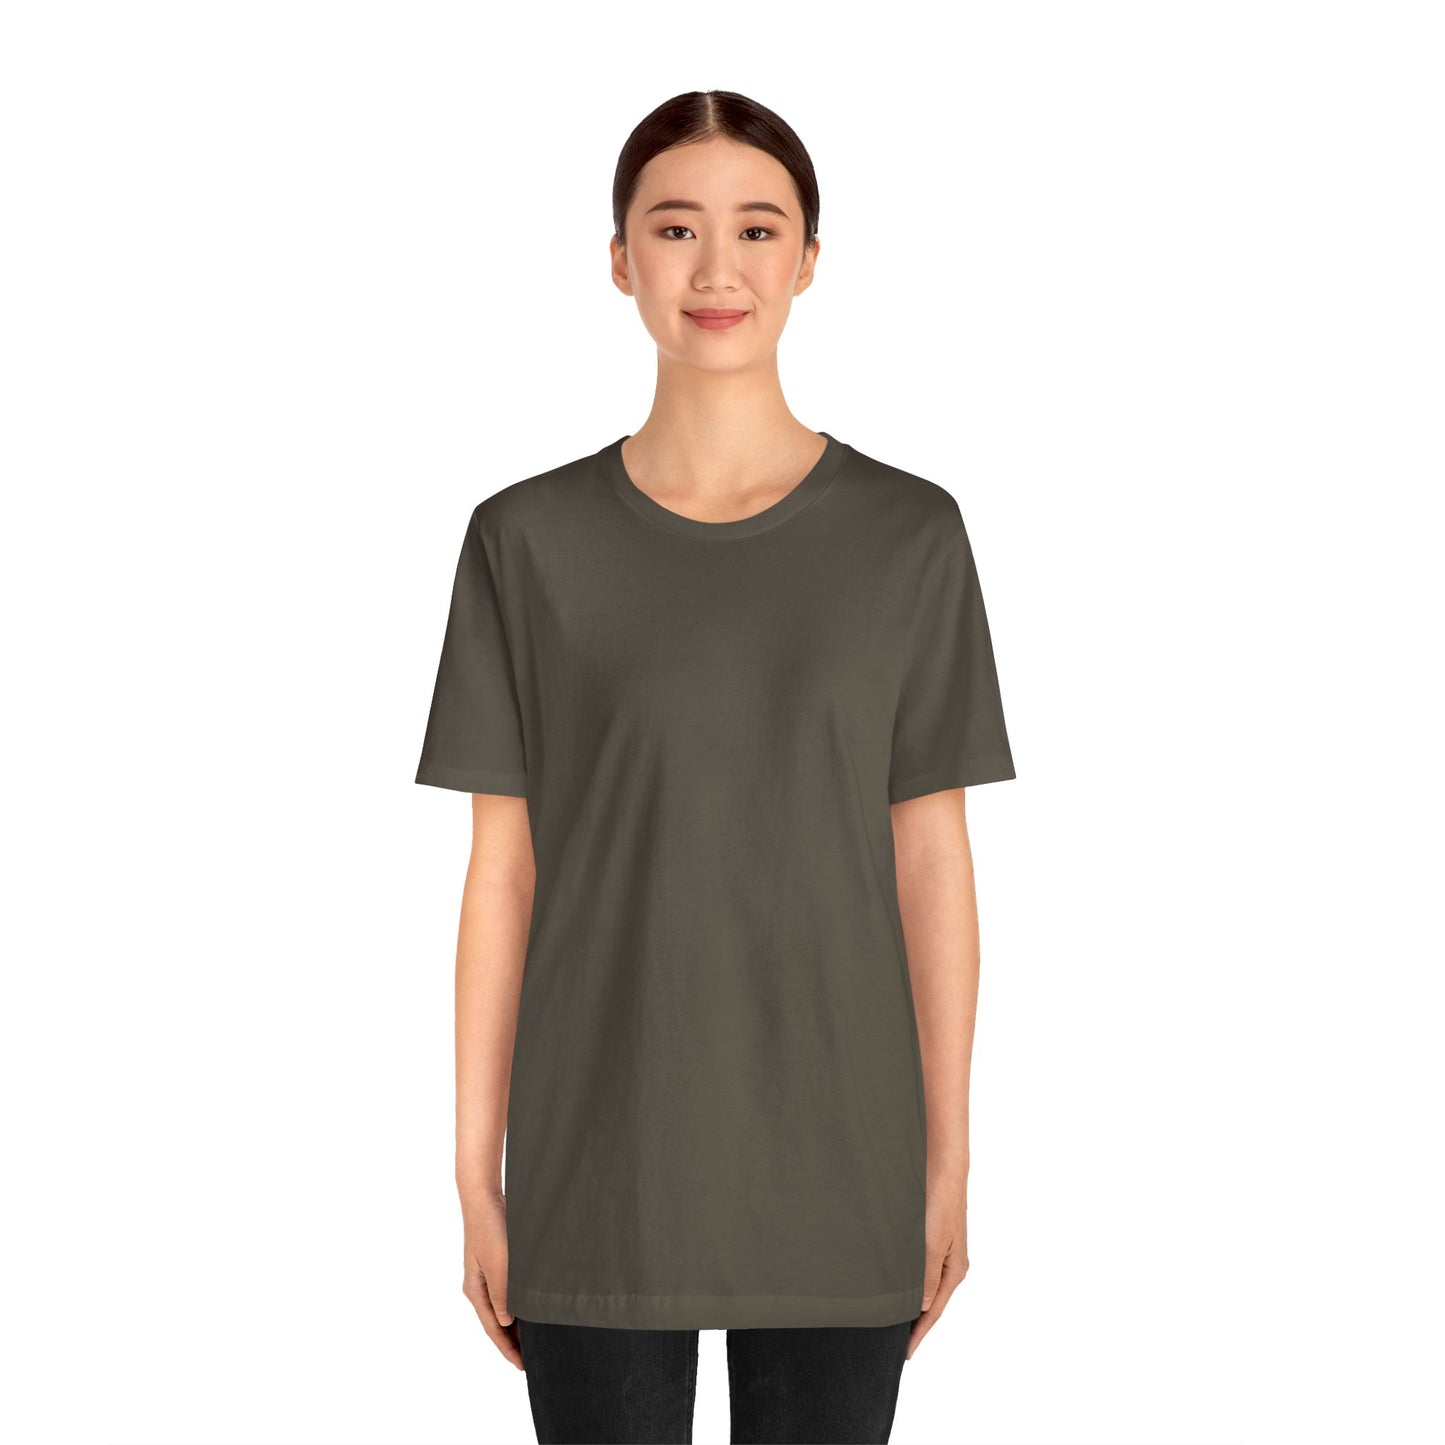 Womens Army T Shirts Premium Casual Short Sleeve Shirts Oversized Tops